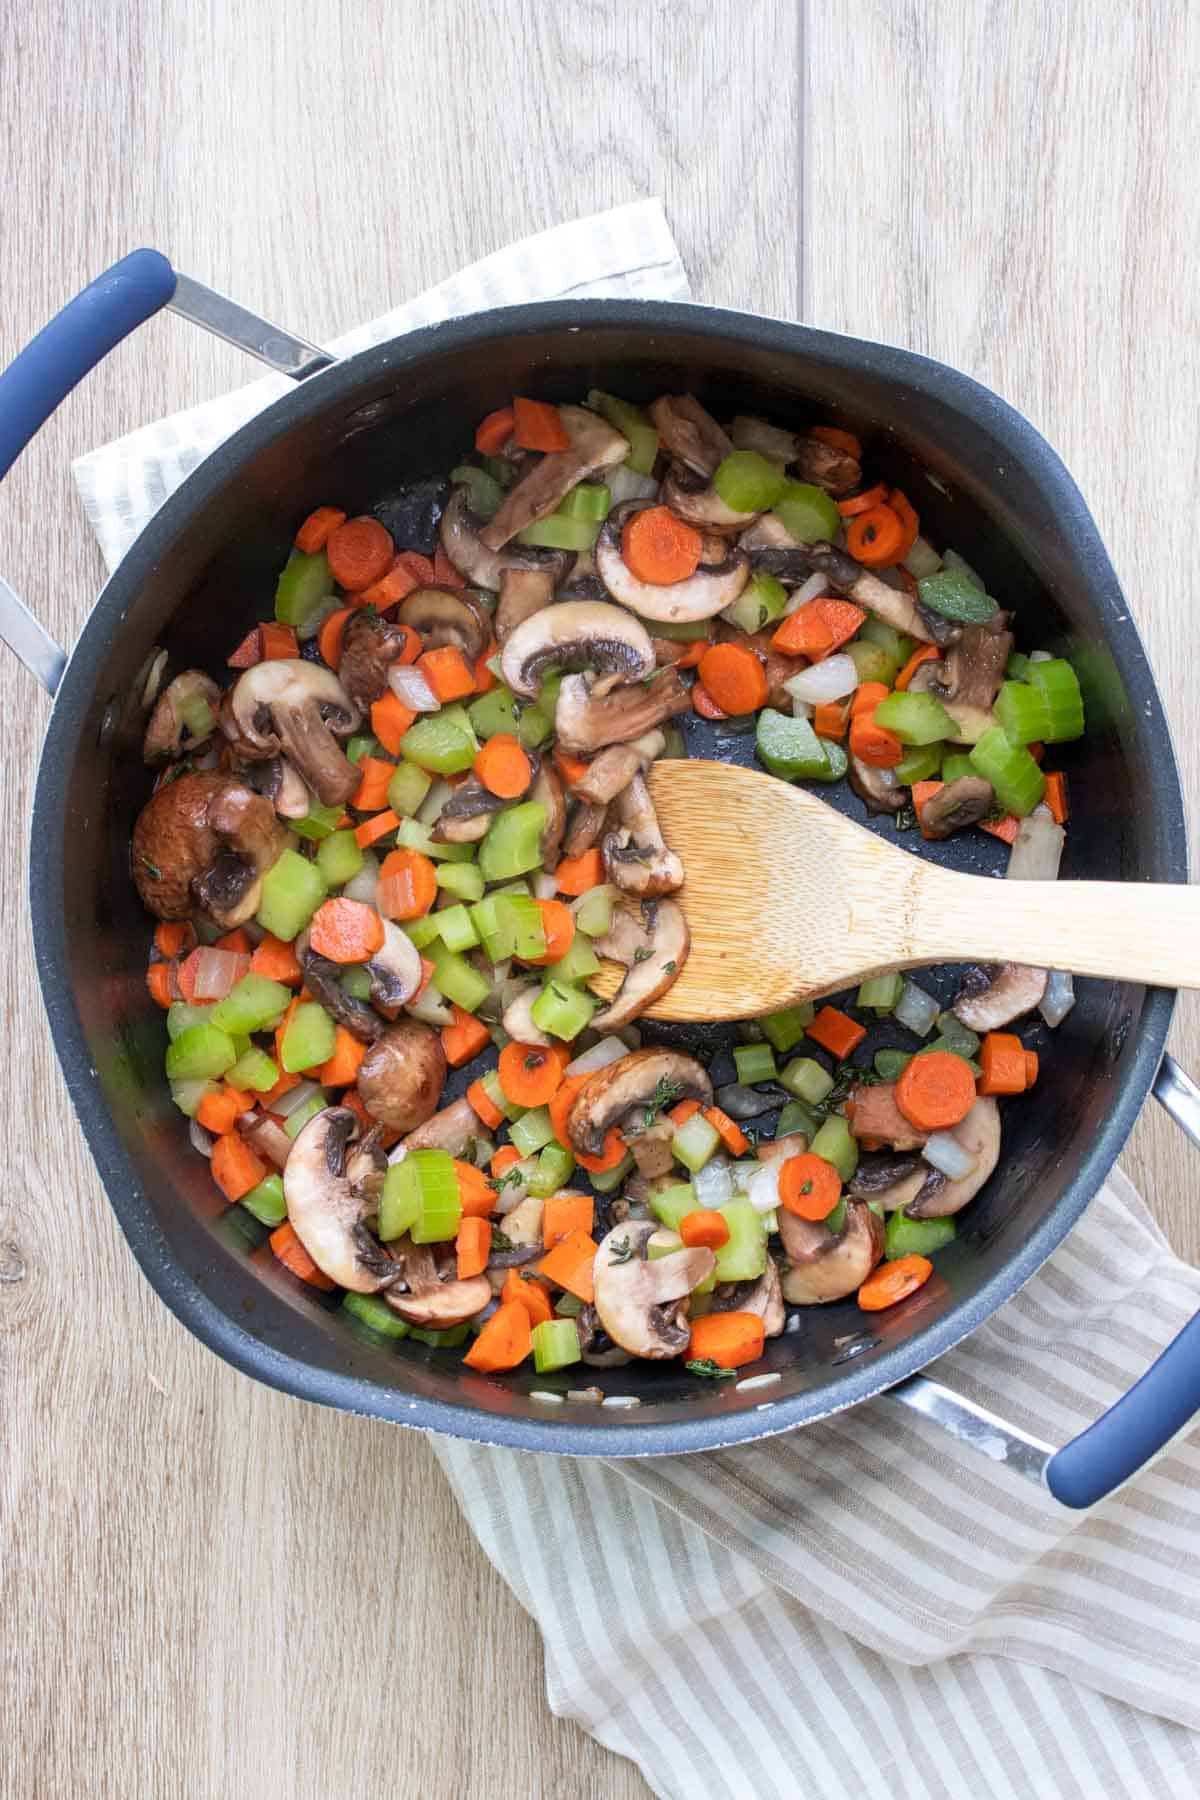 Top view of a wooden spoon mixing chopped carrots, celery and mushrooms in a black pot.